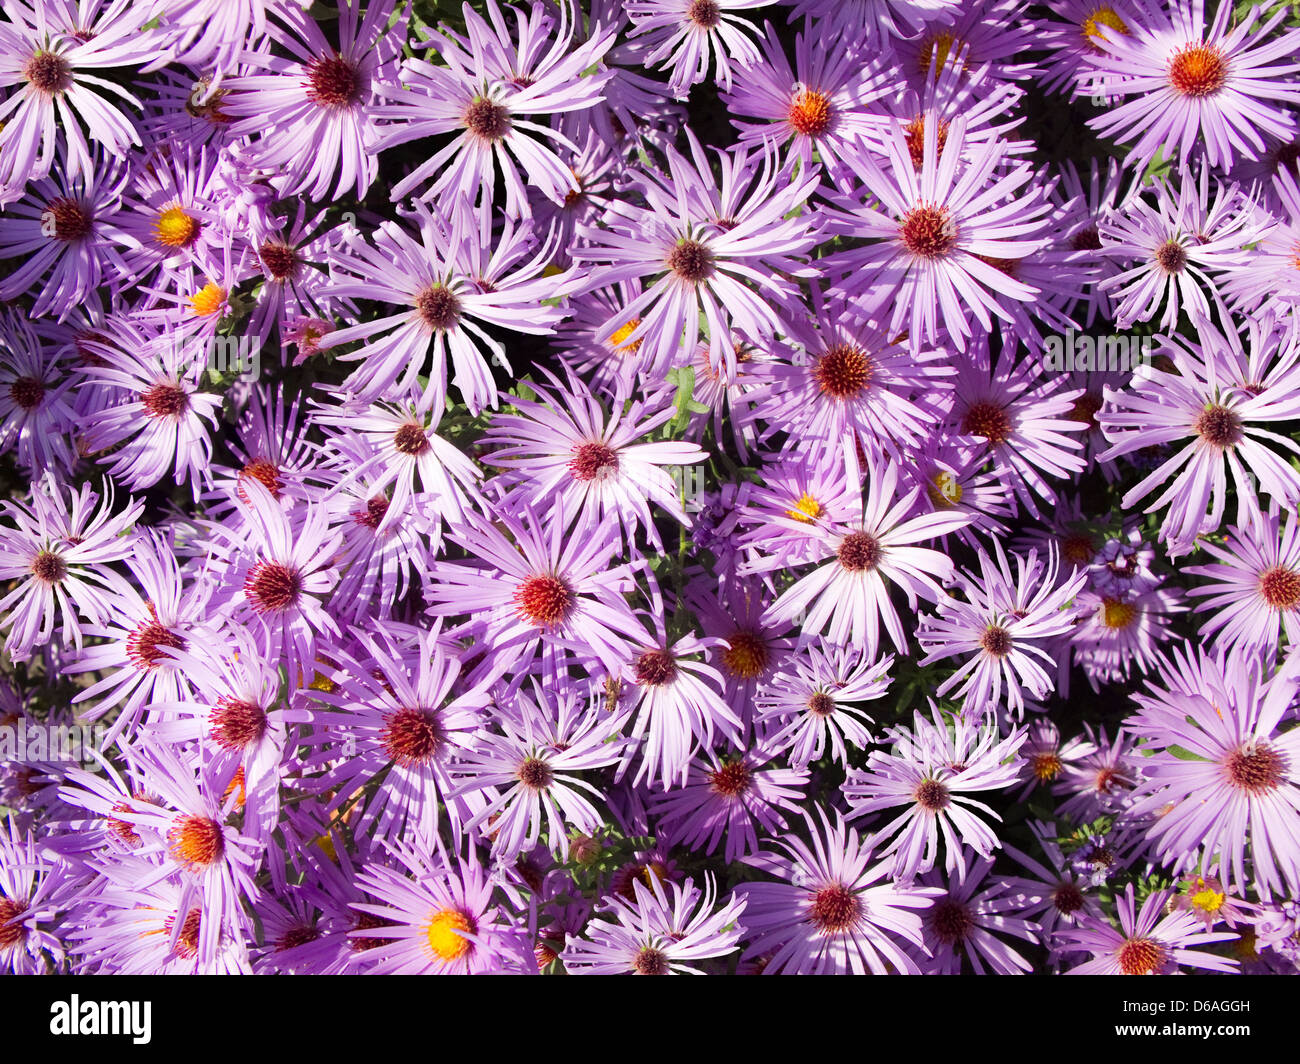 Close up of a bed of aster flowers in vibrant lavender and purple Stock Photo